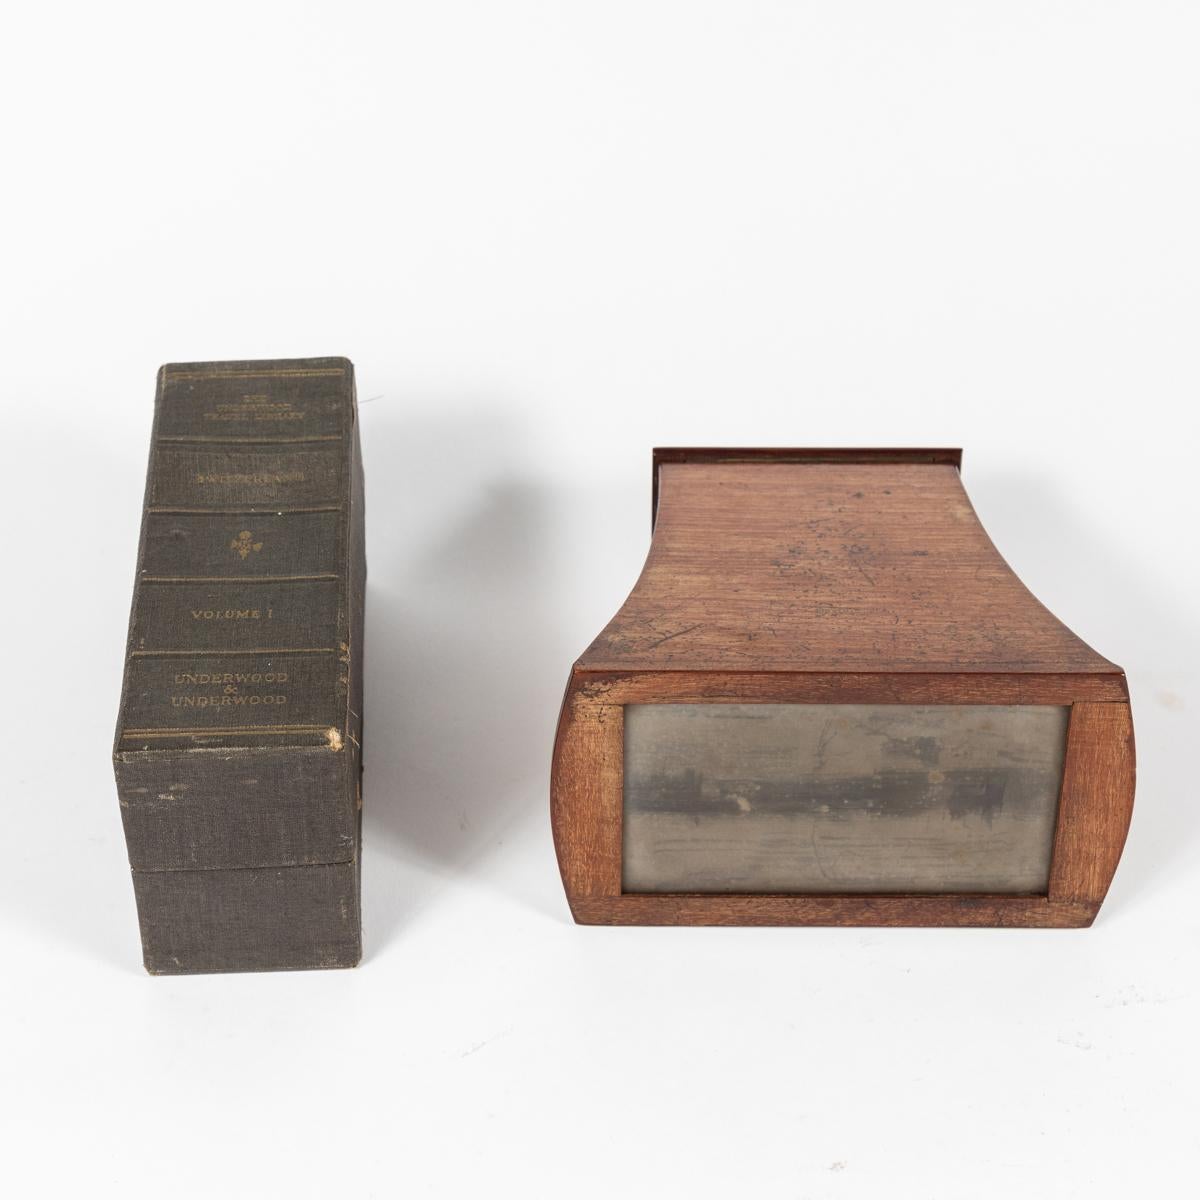 Wooden stereoscope viewer with gorgeous sepia viewing cards of the Swiss Alps from late 19th-century England. A delightful piece of visual technology, the optical effect is always a fresh surprise.

England, circa 1880

Dimensions: 7W x 7D x 4H